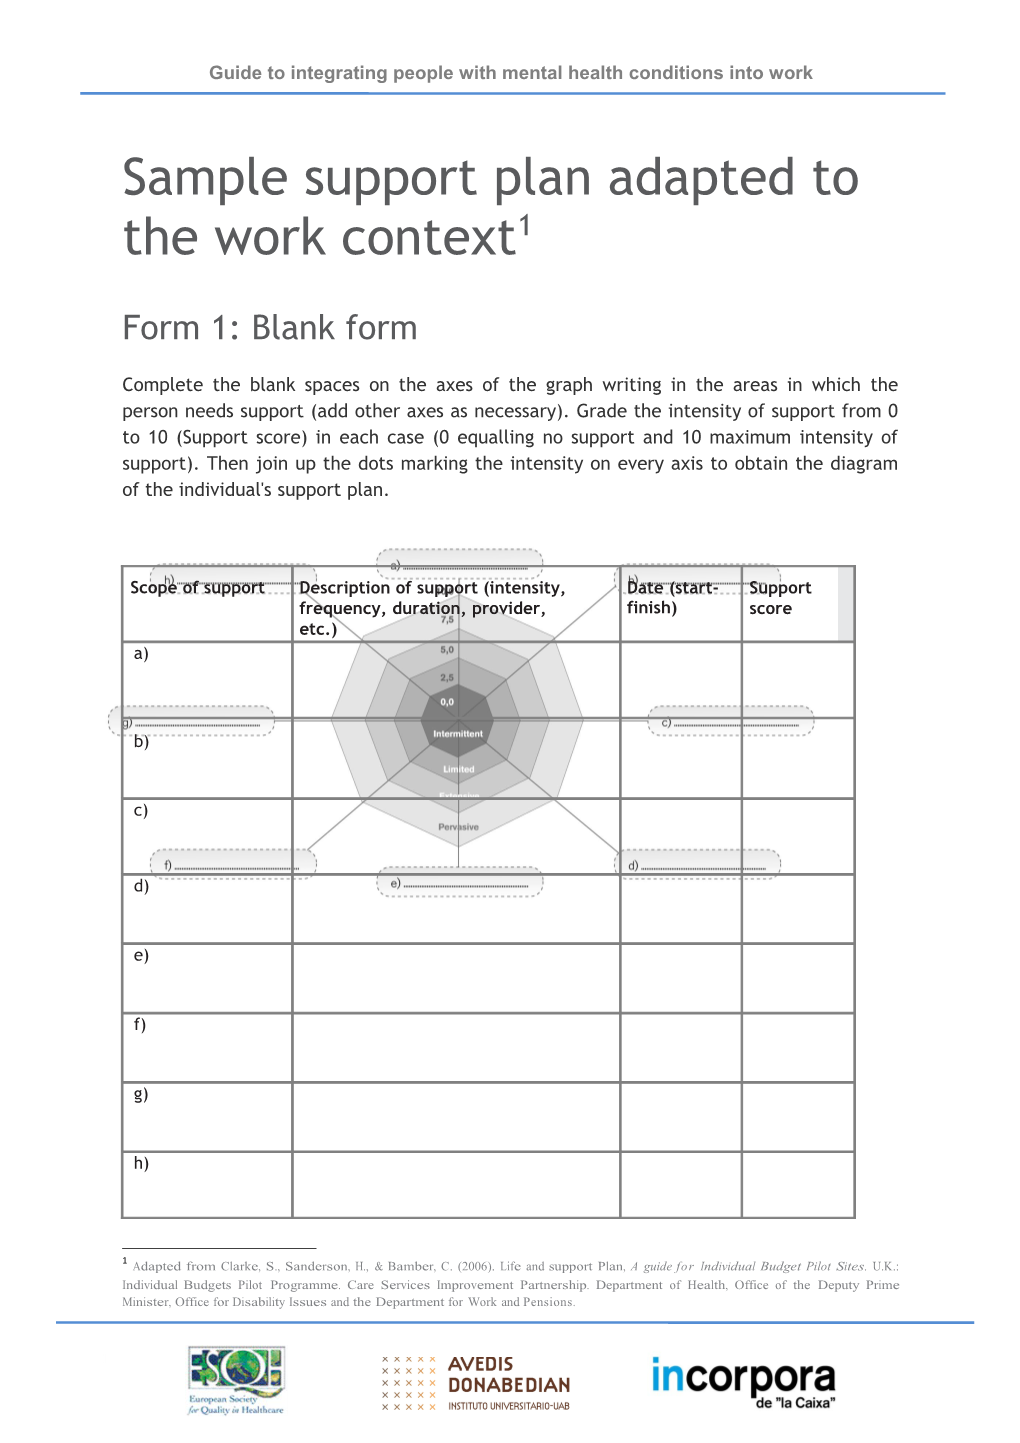 Sample Support Plan Adapted to the Work Context 1